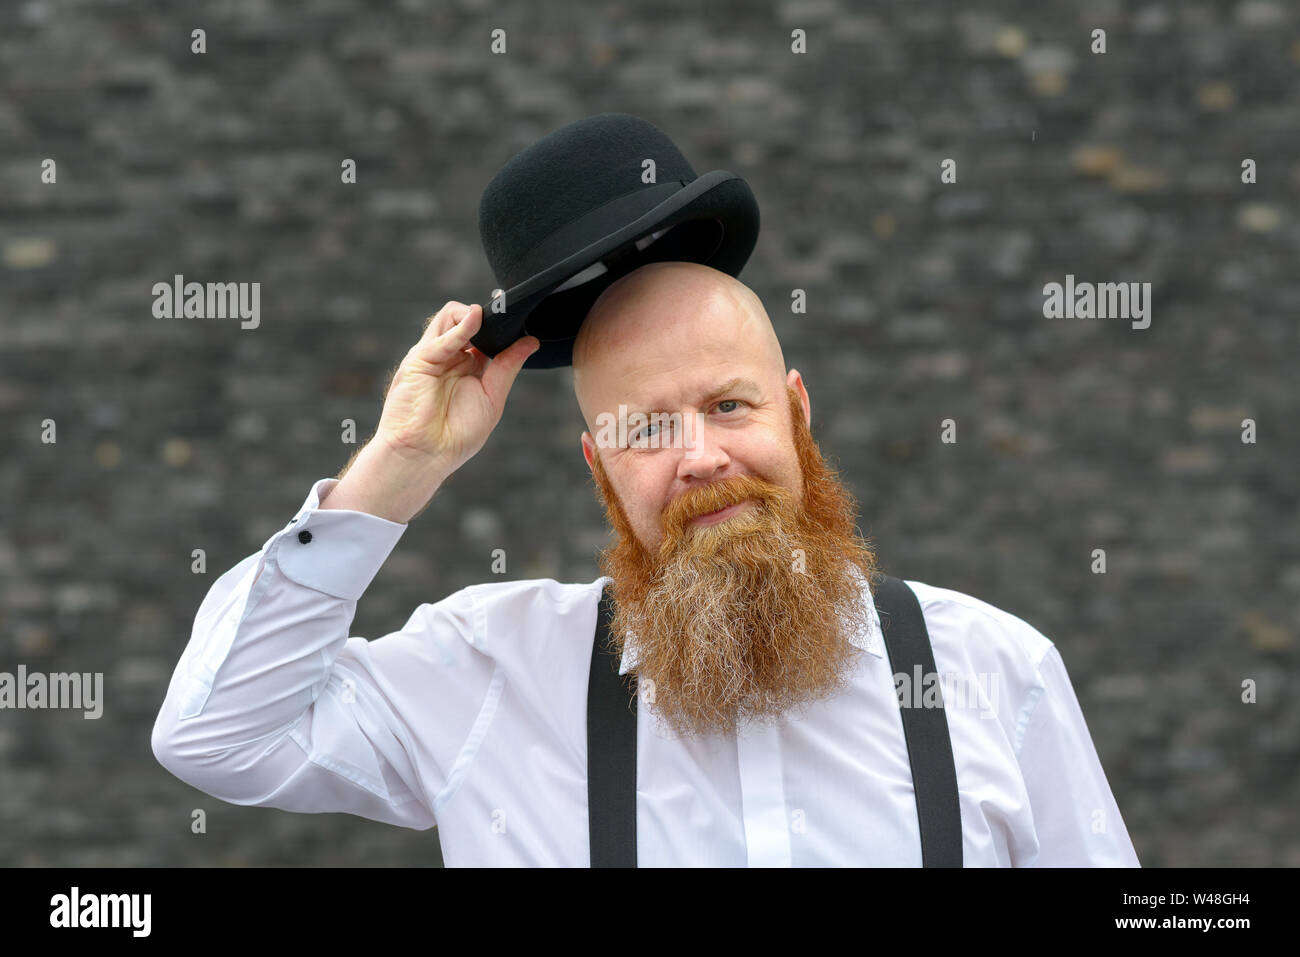 Polite bald bearded man doffing his bowler hat in greeting with a friendly welcoming smile over a grey background Stock Photo